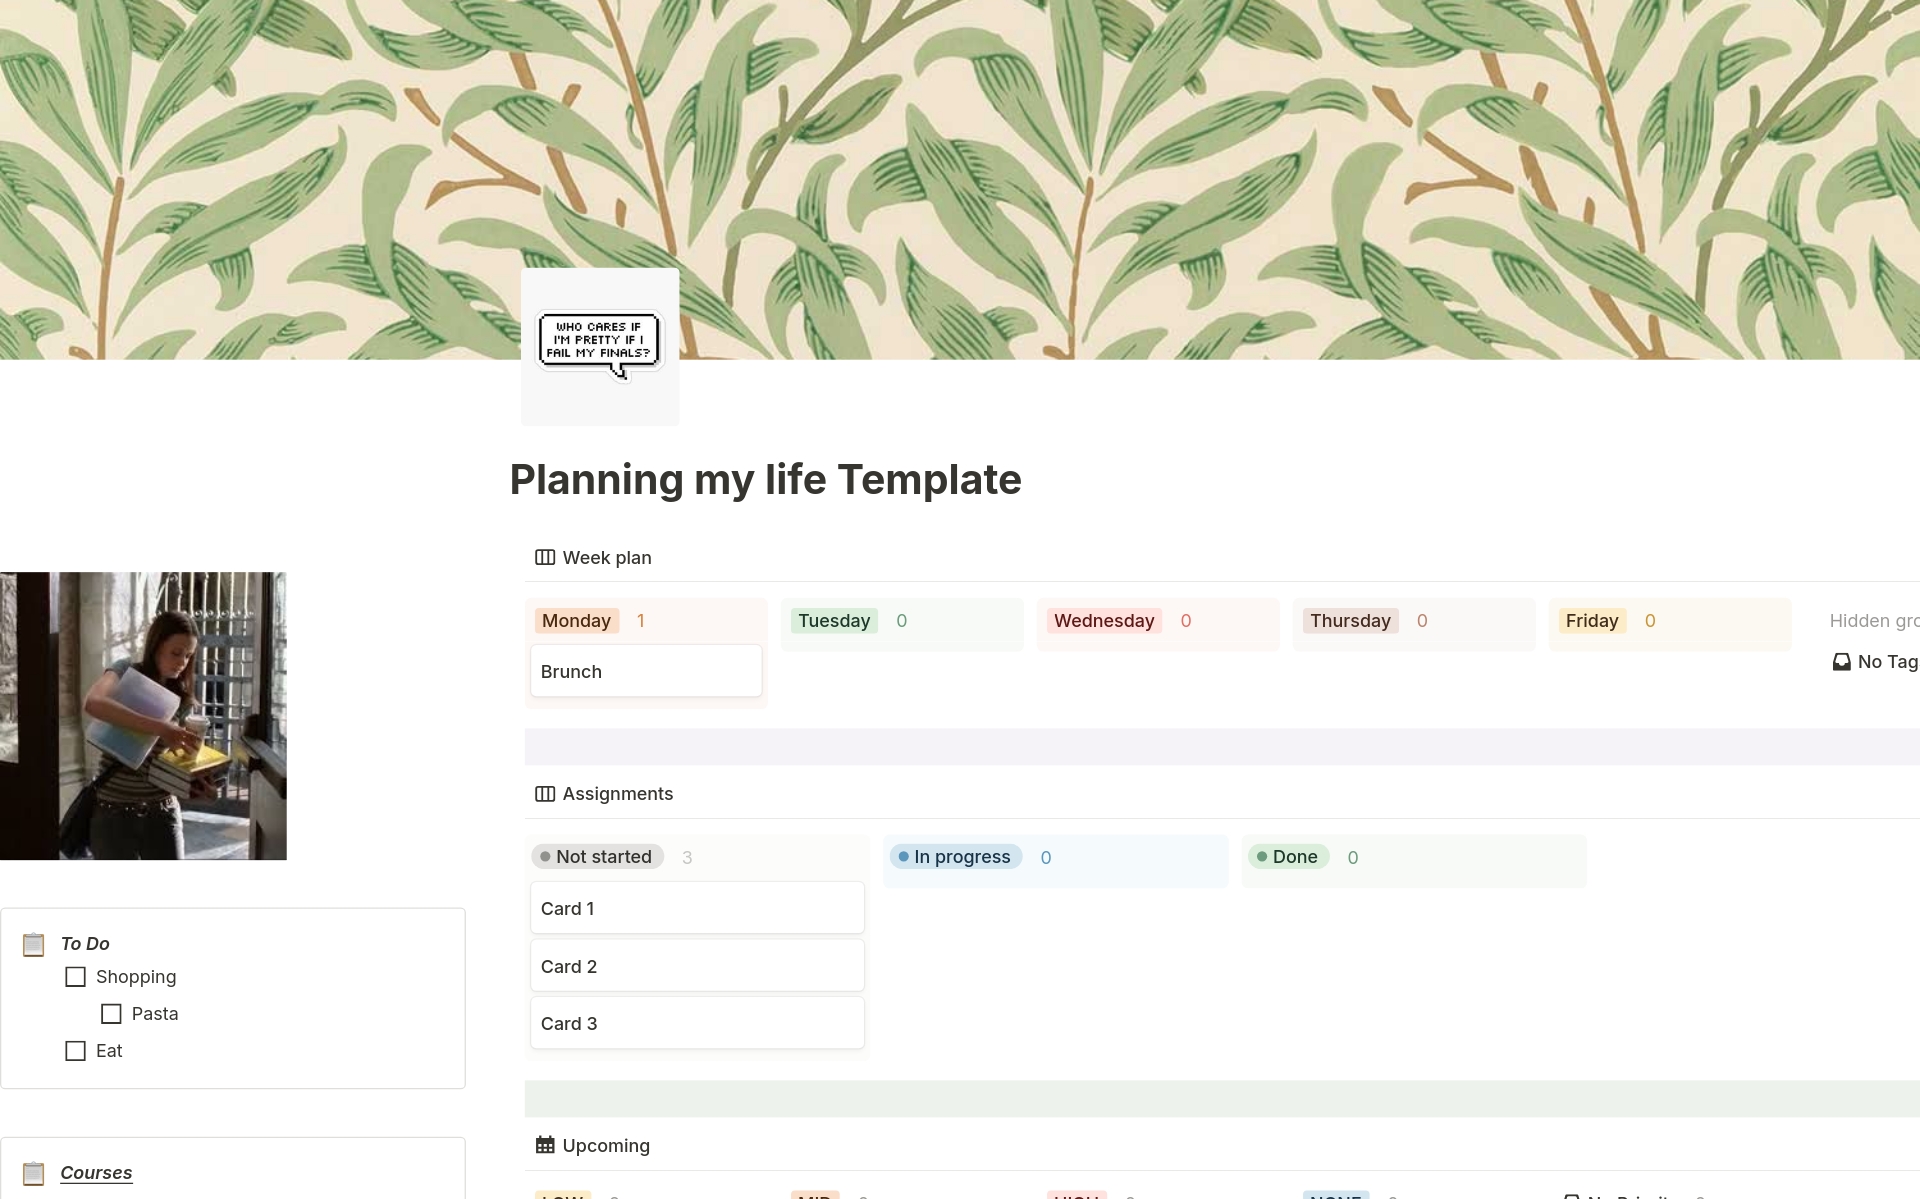 An aesthetic planner for students to organise university or academic life, inspired by Rory Gilmore